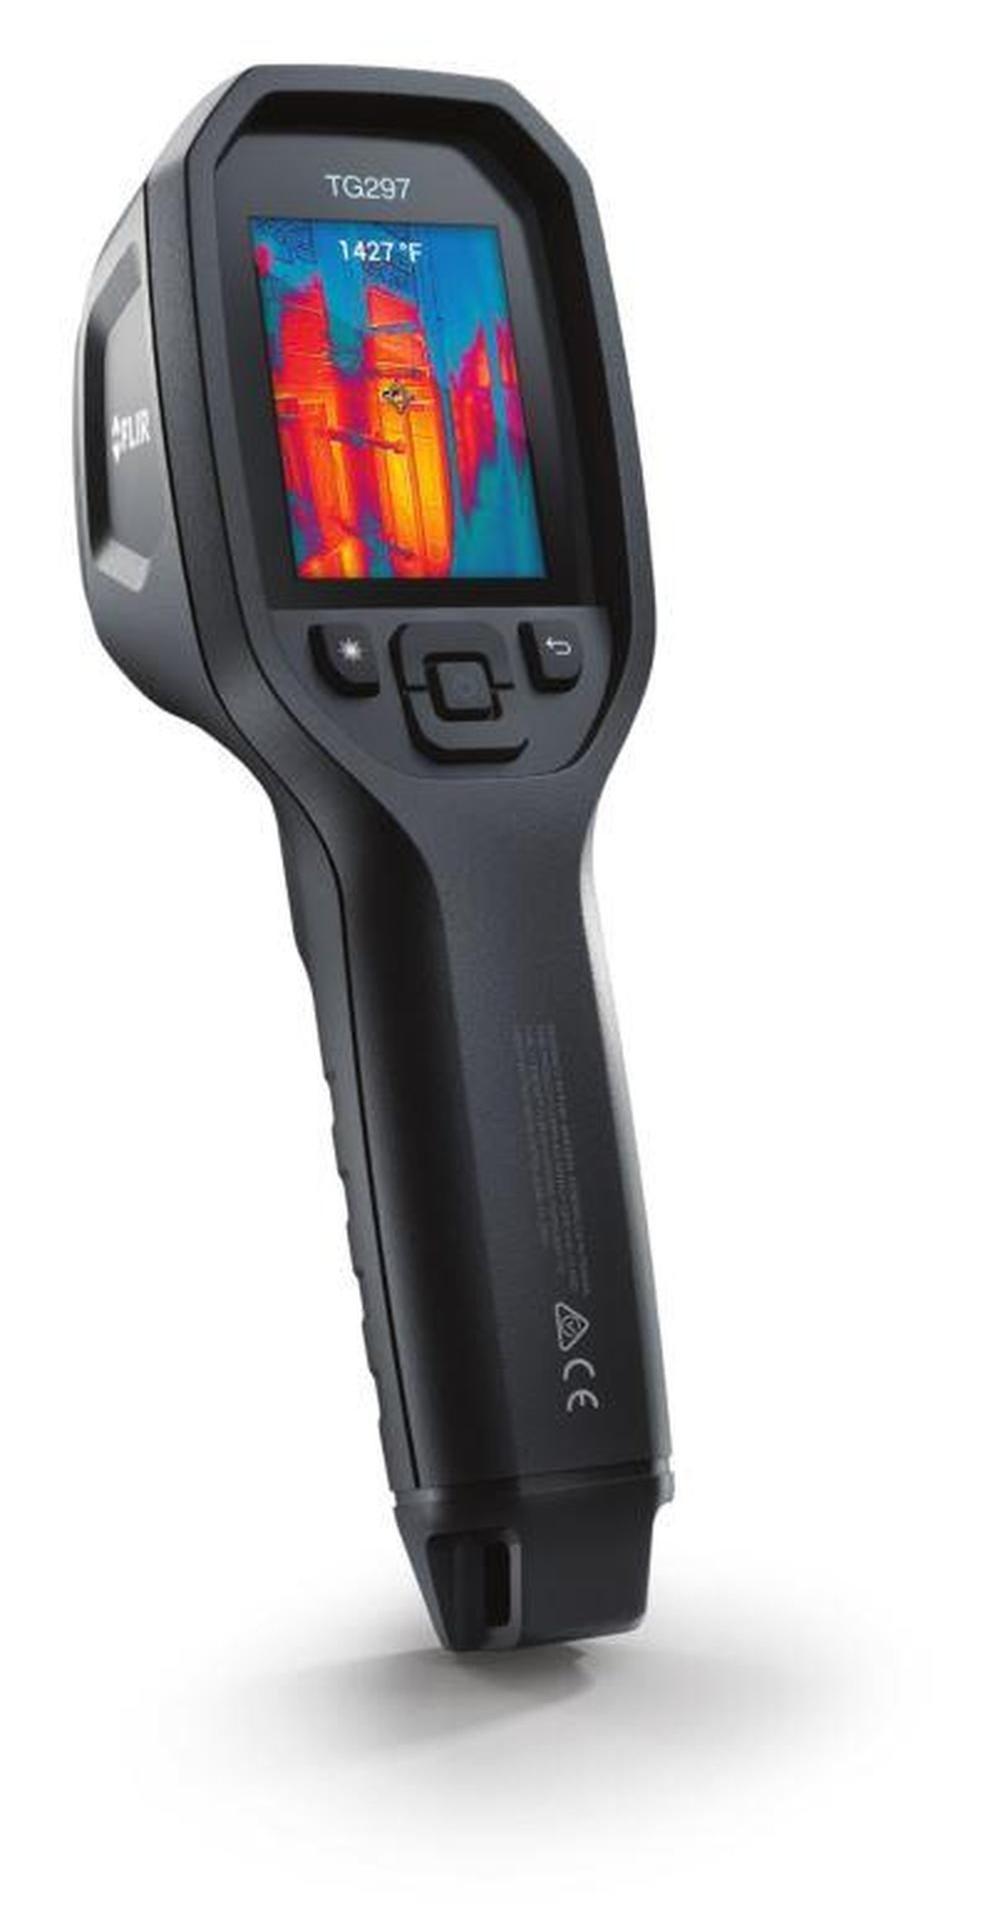 Infrared cameras seeing 4x more details than their predecessors